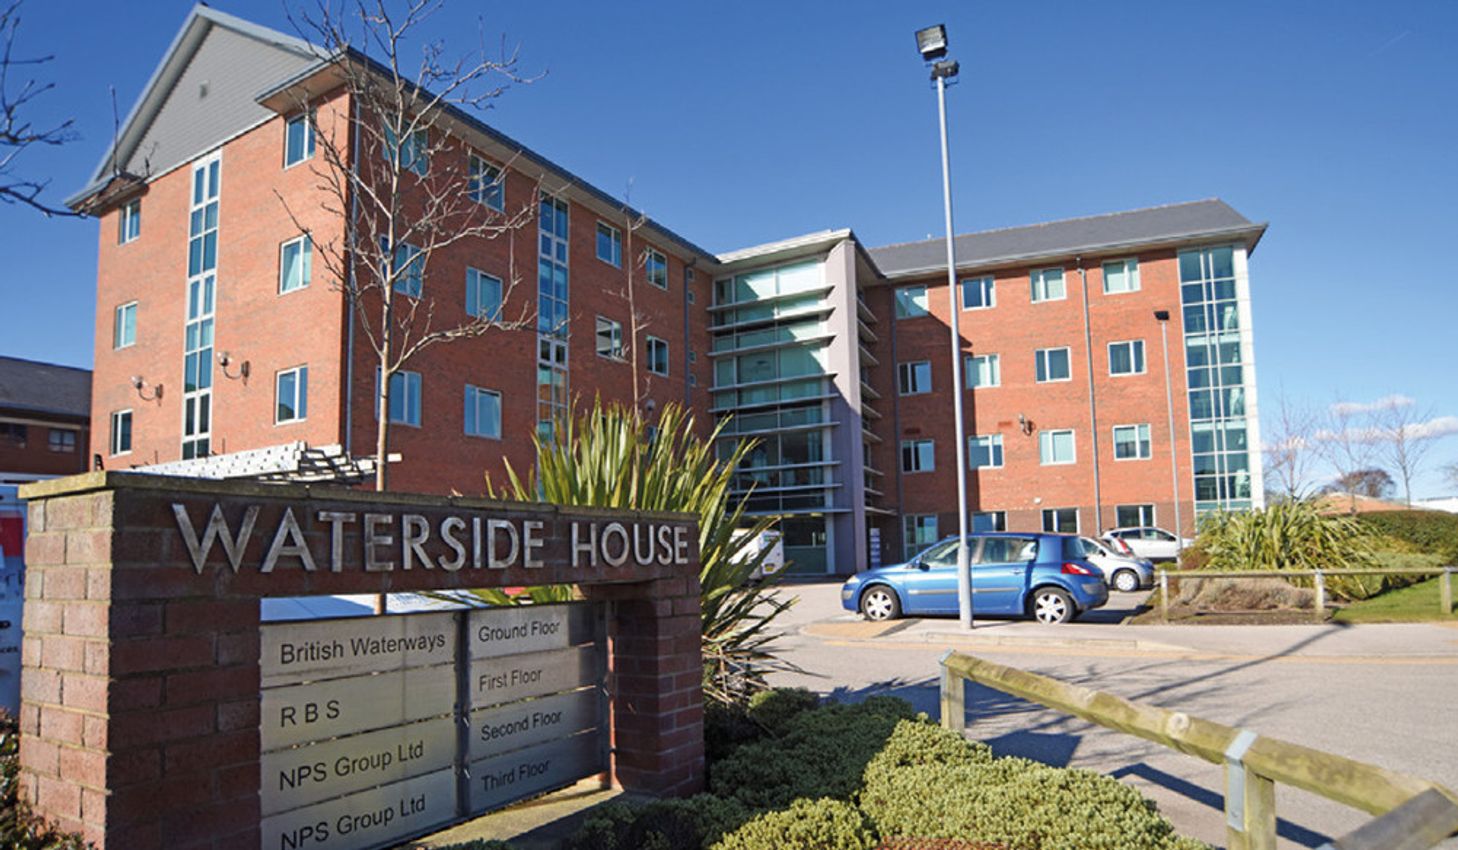 Centre for Trade Technology, Waterside Dr, Wigan WN3 5AZ, UK